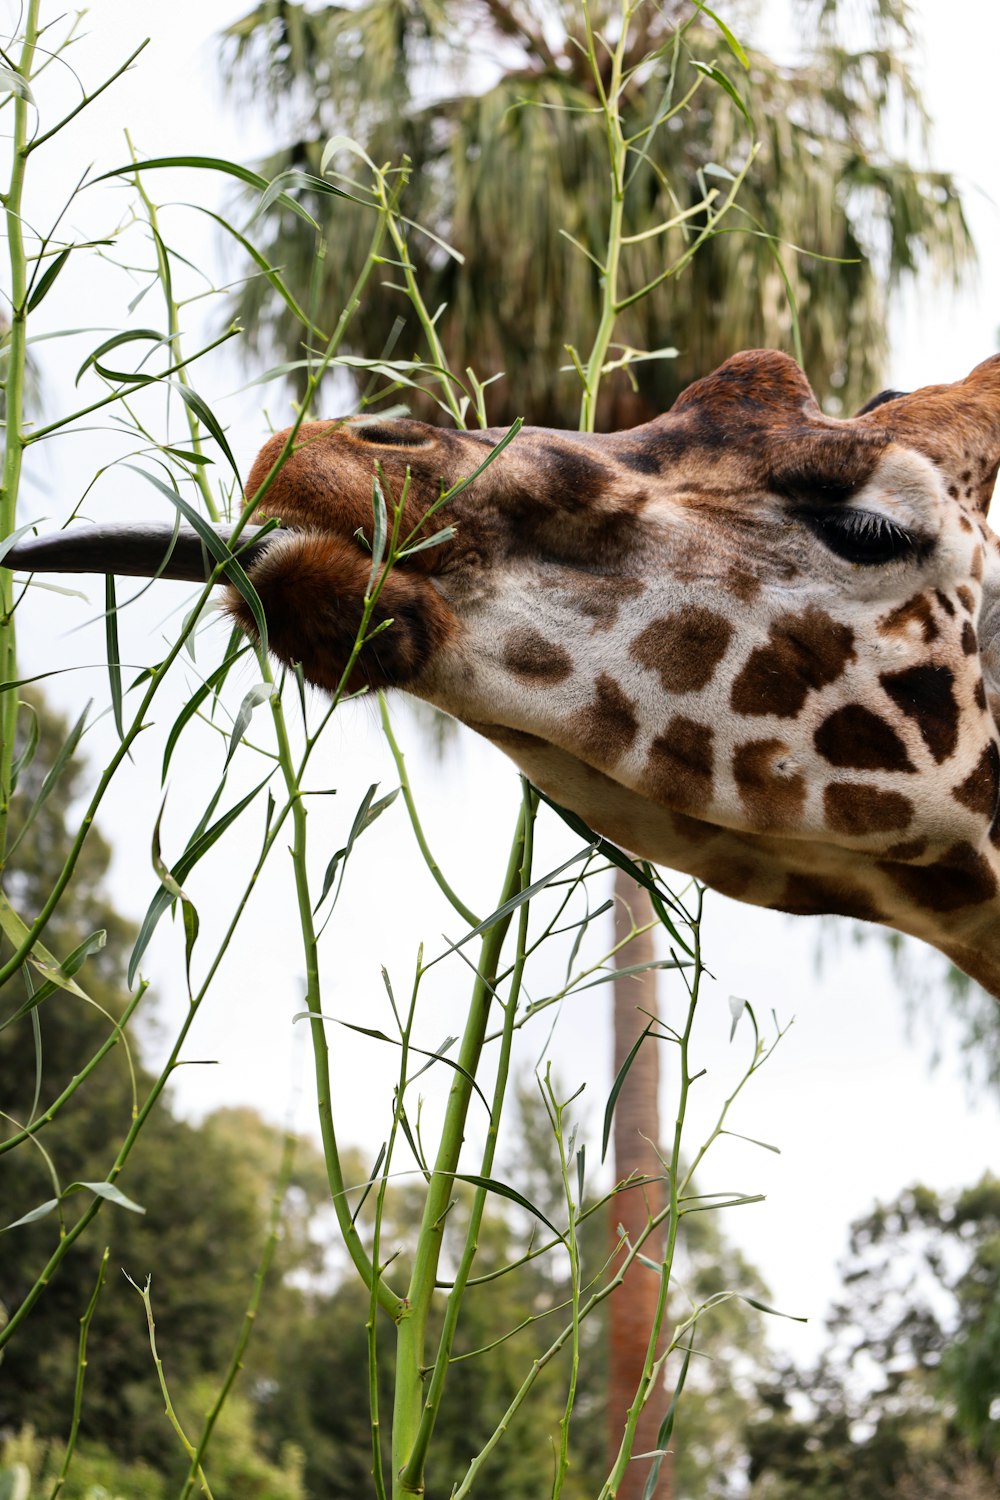 a close up of a giraffe eating from a tall plant